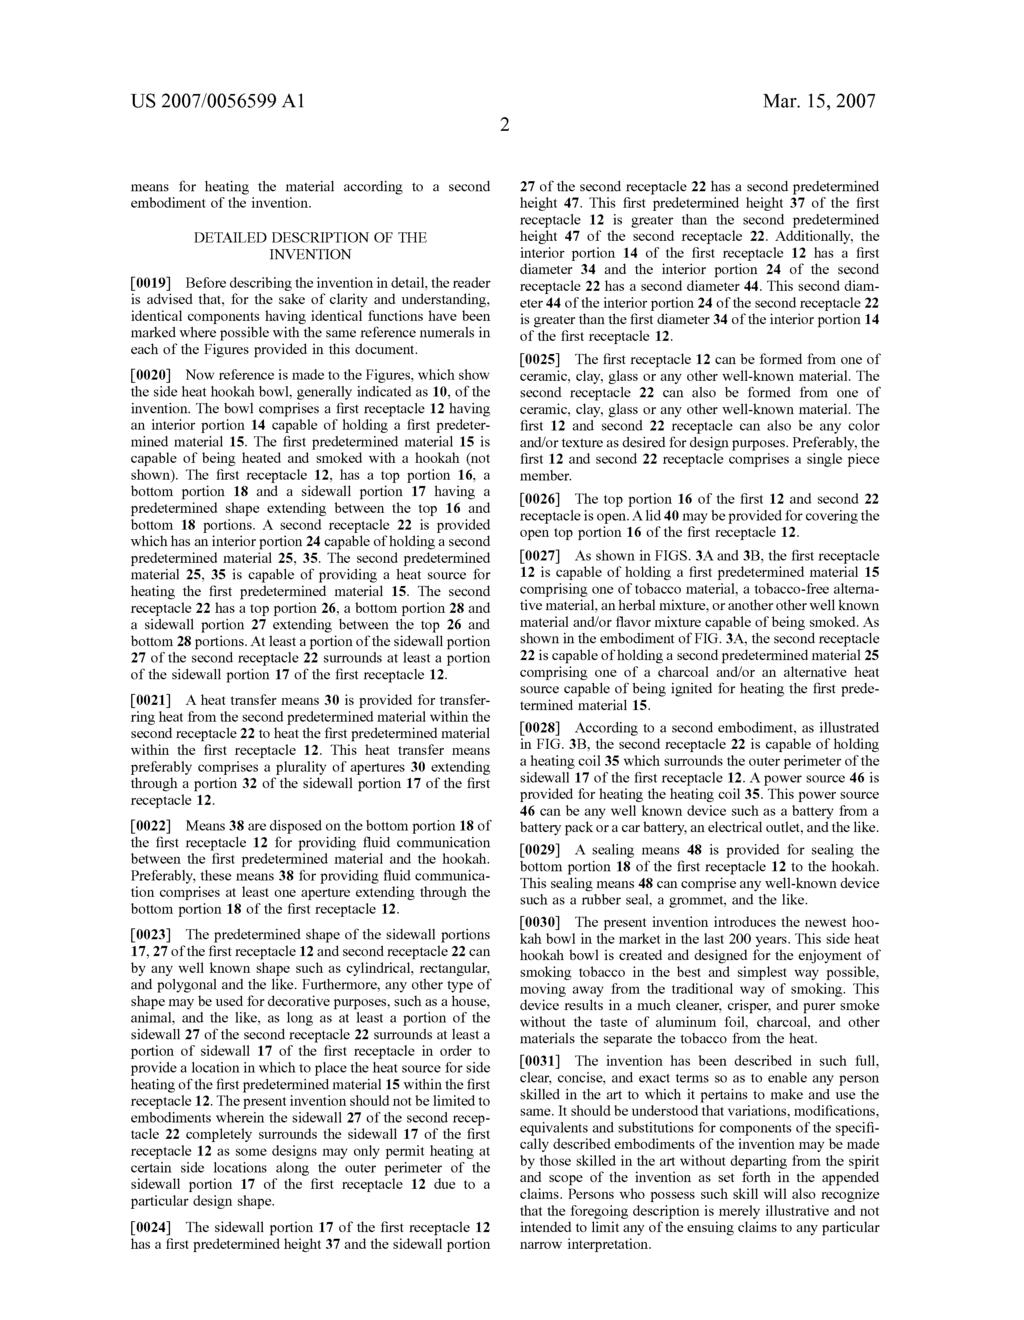 US 2007/005.6599 A1 Mar. 15, 2007 means for heating the material according to a second embodiment of the invention. DETAILED DESCRIPTION OF THE INVENTION 0019.